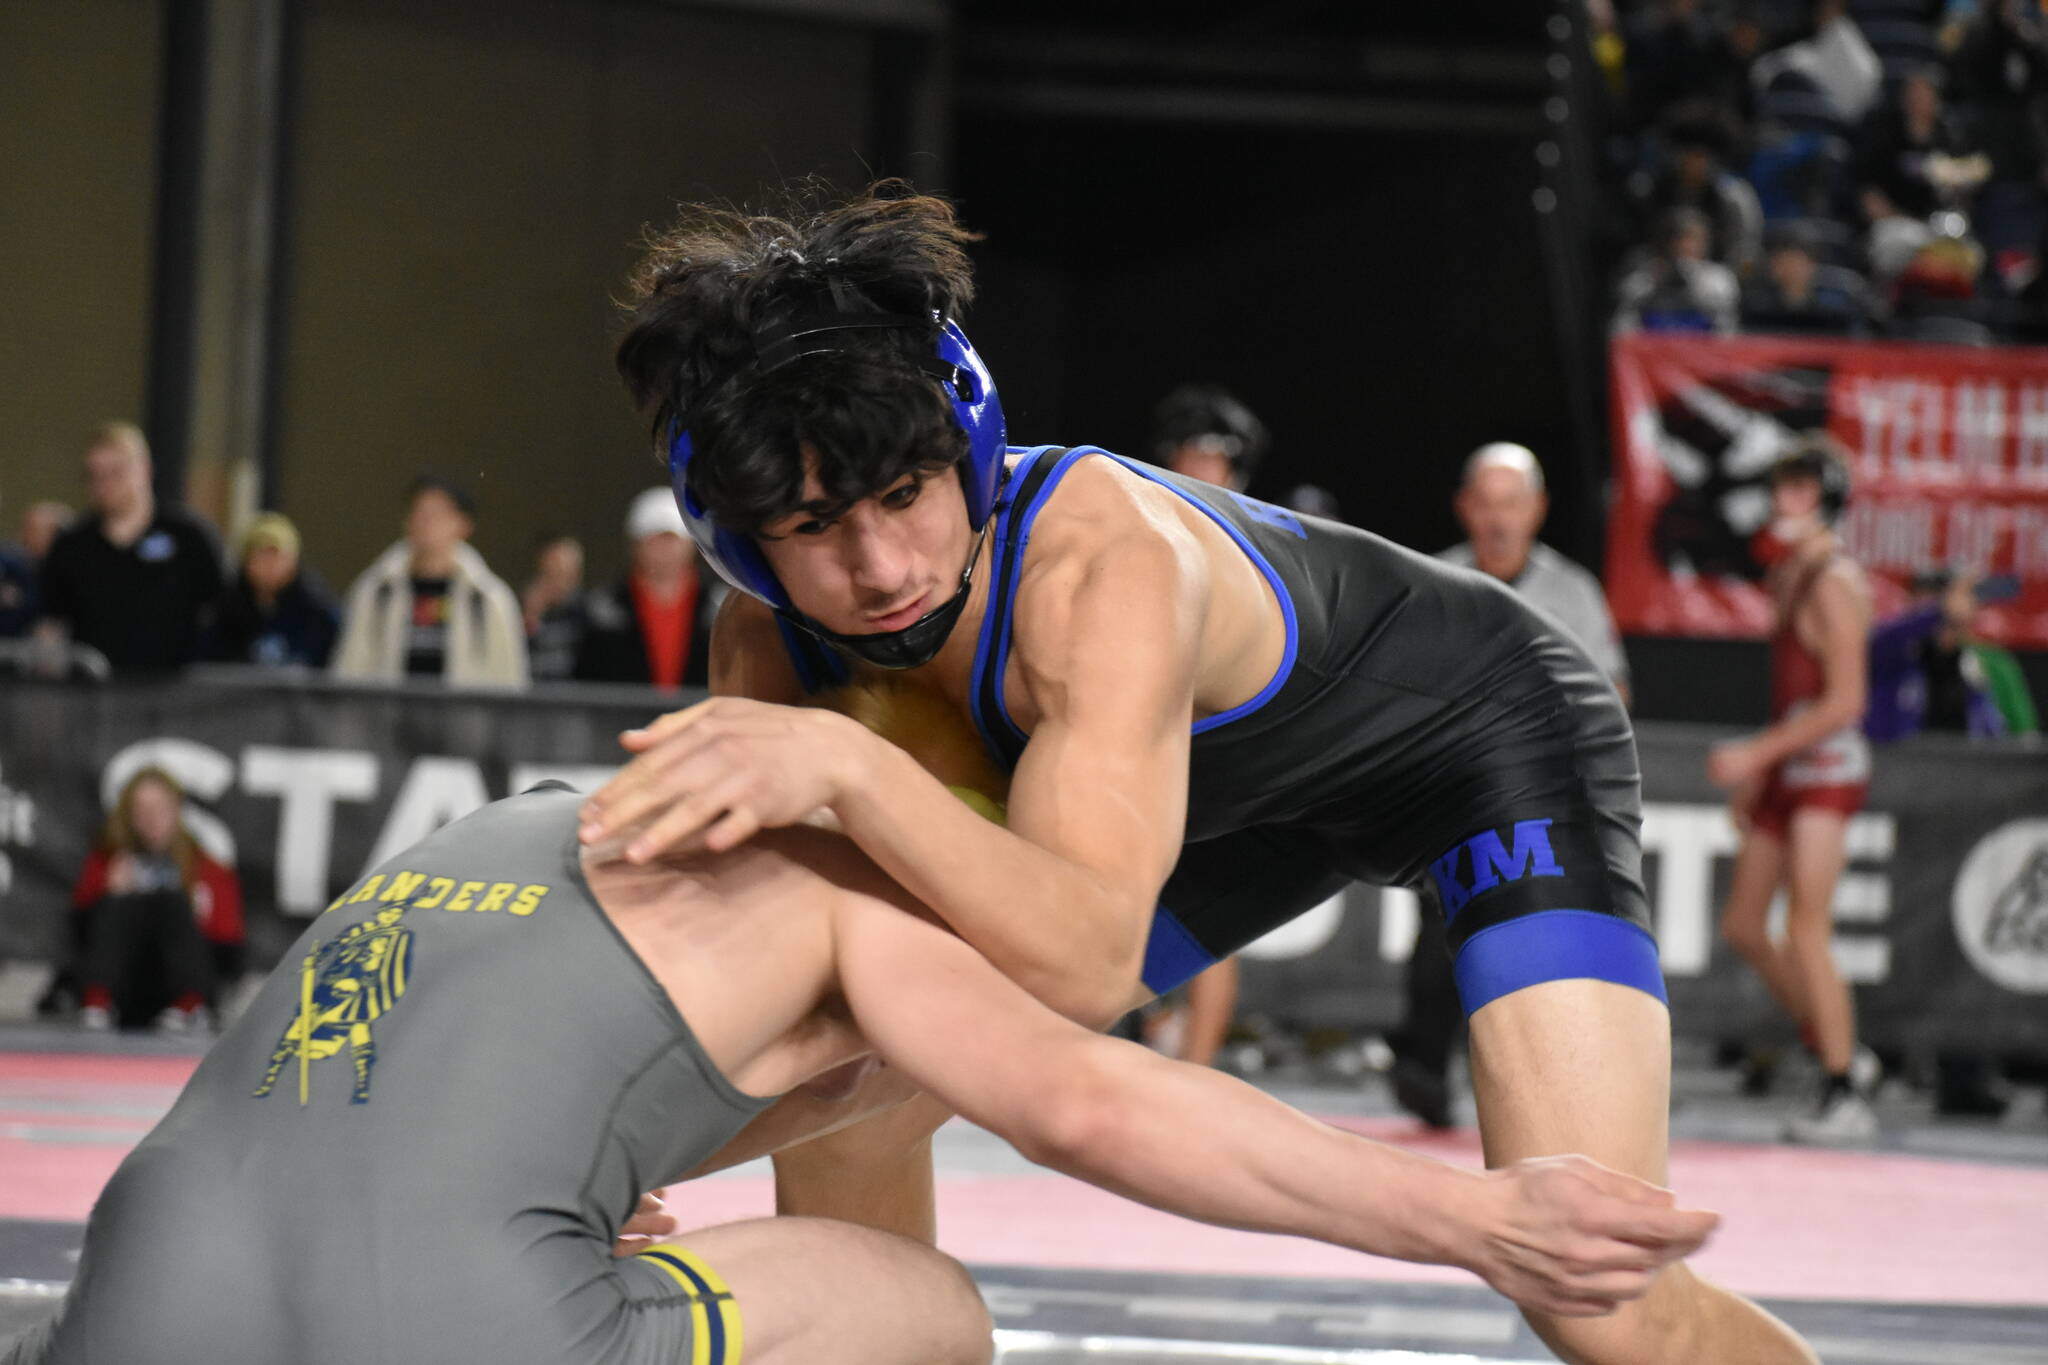 Adonai Garza wrestling on the first day of competition. Ben Ray / The Reporter